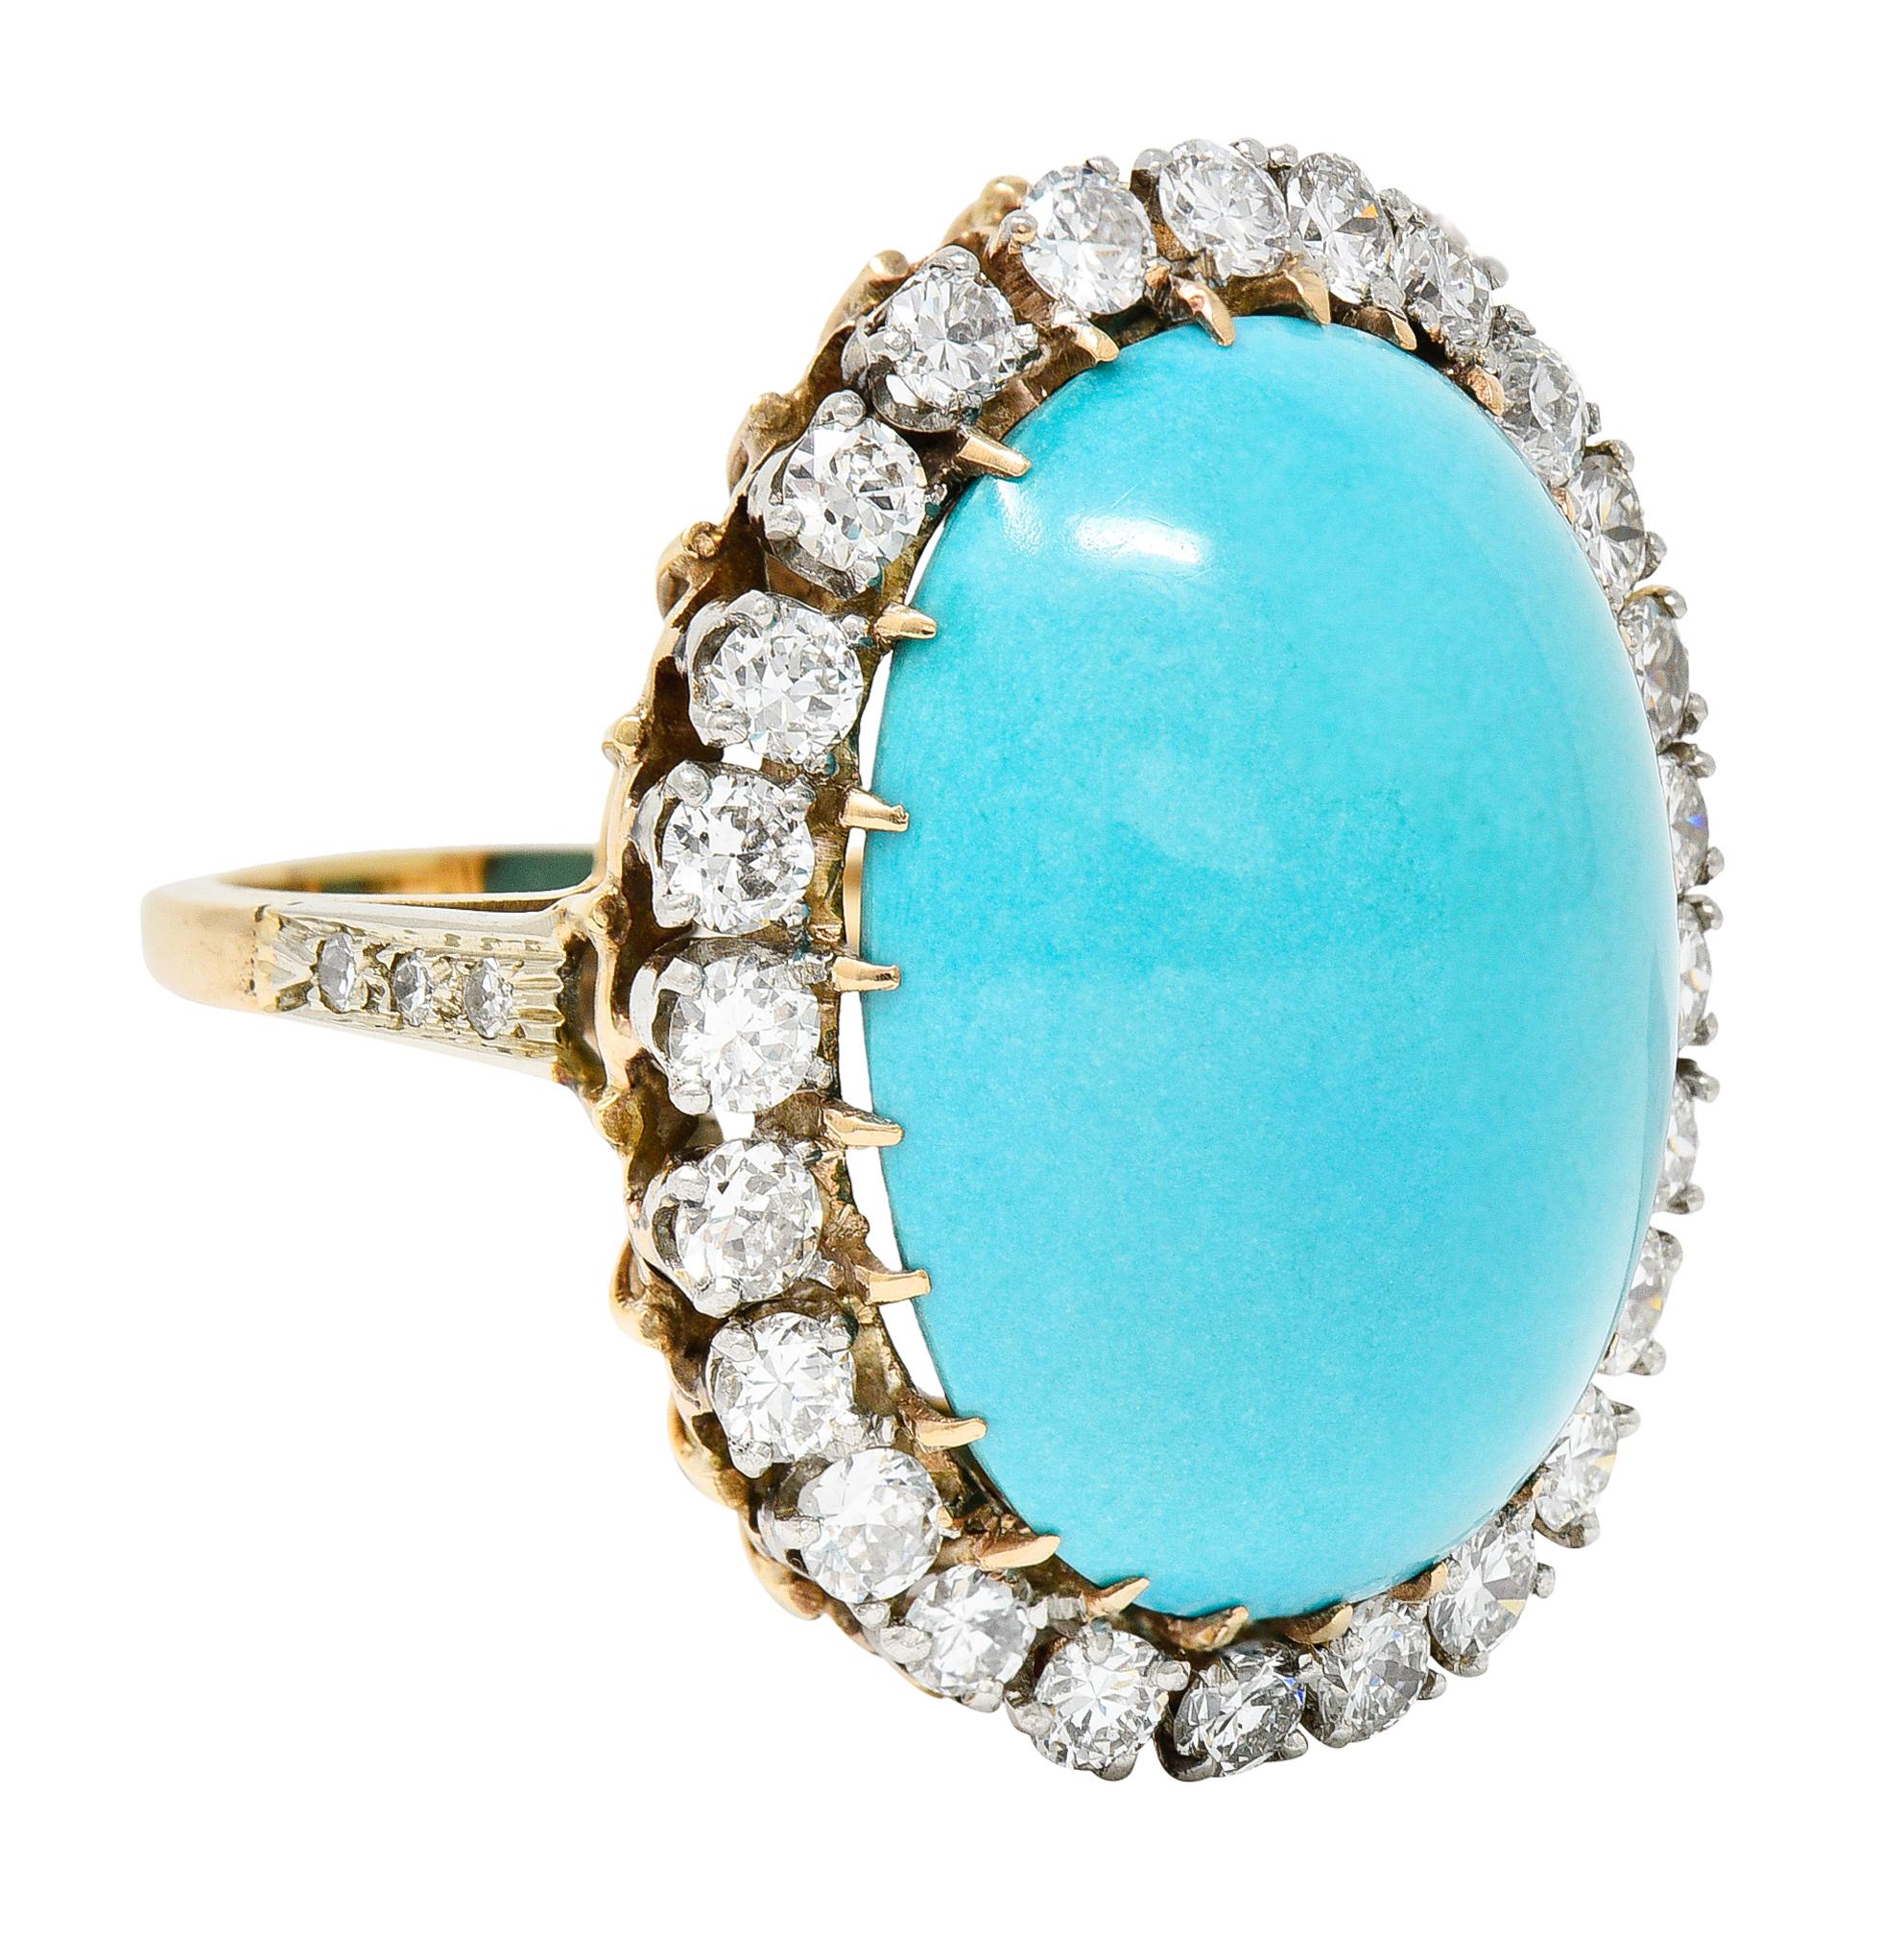 Substantial cluster ring features an oval turquoise cabochon measuring approximately 23.0 x 17.5 mm

Opaque and uniformly robin's egg blue with no front facing matrix - excellent polish

Talon set in yellow gold with a surround of round brilliant